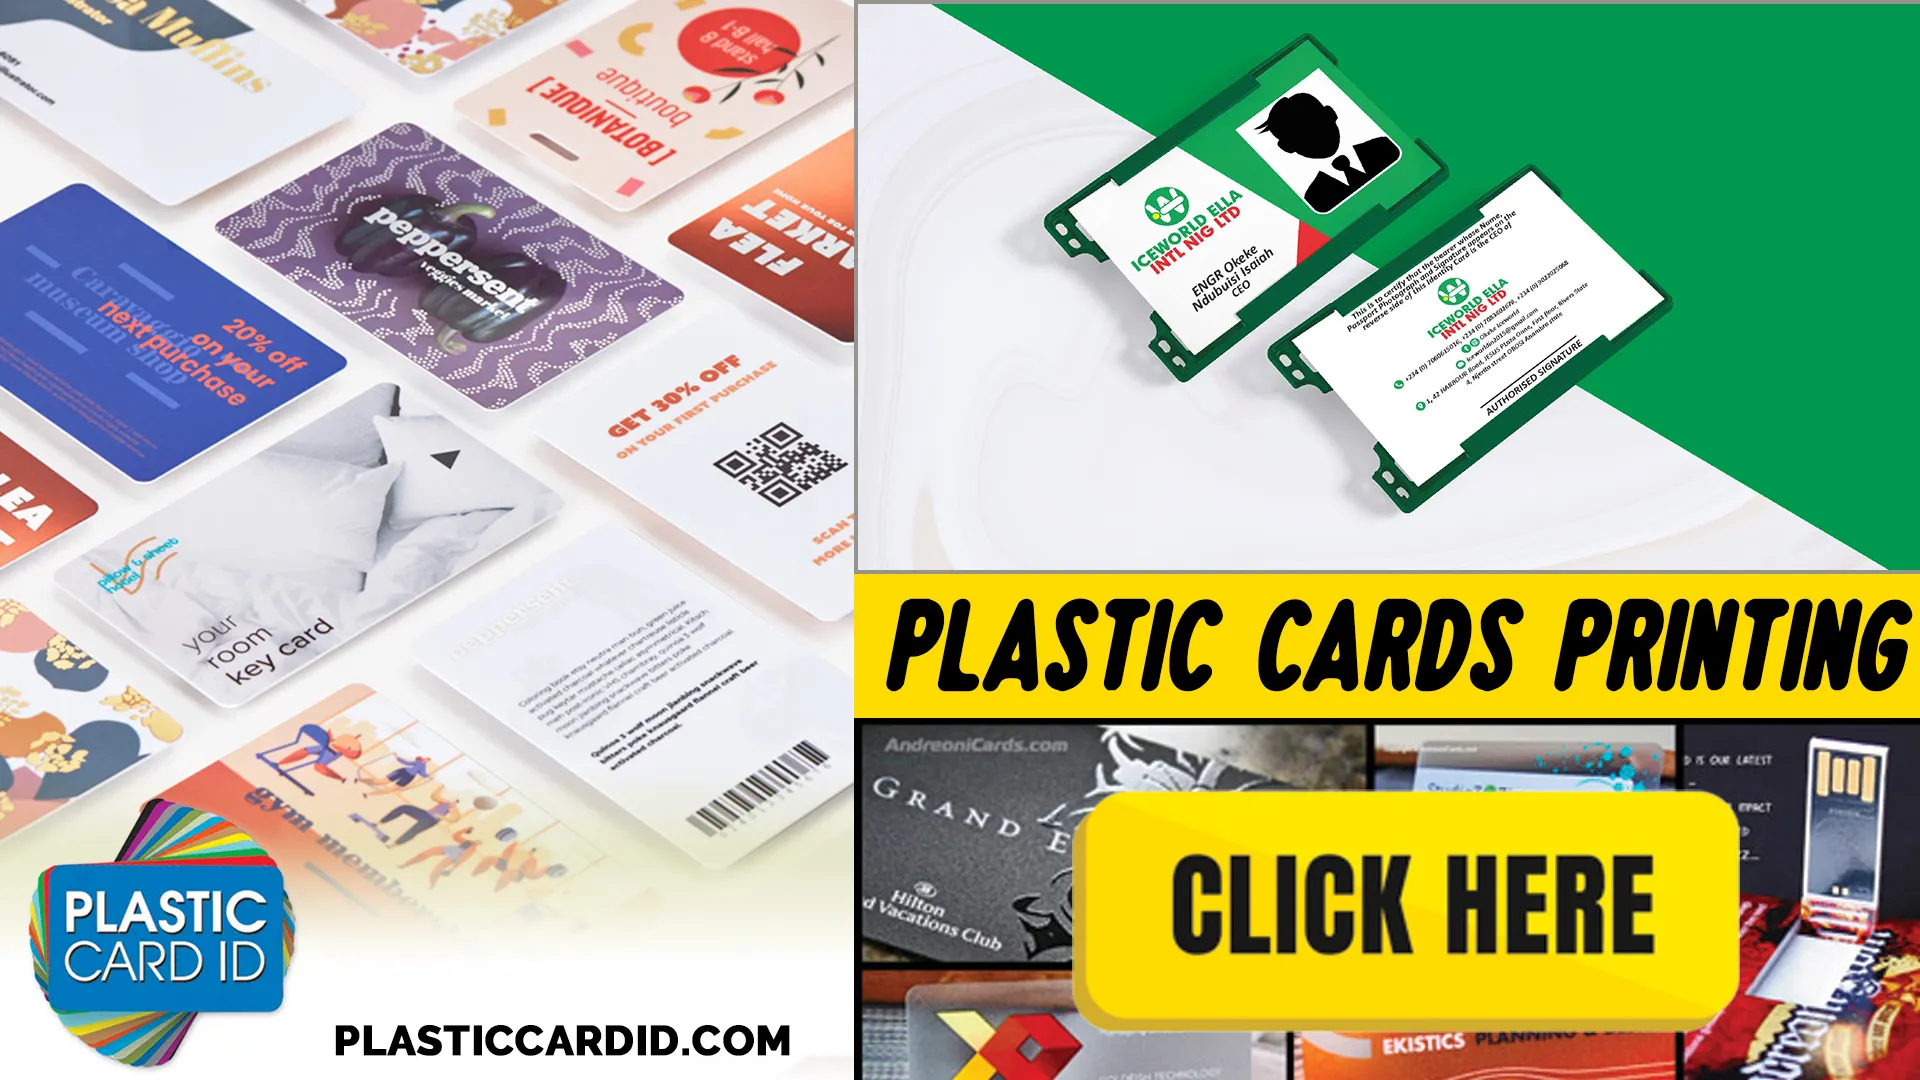 Welcome to Innovative Card Solutions by Plastic Card ID




